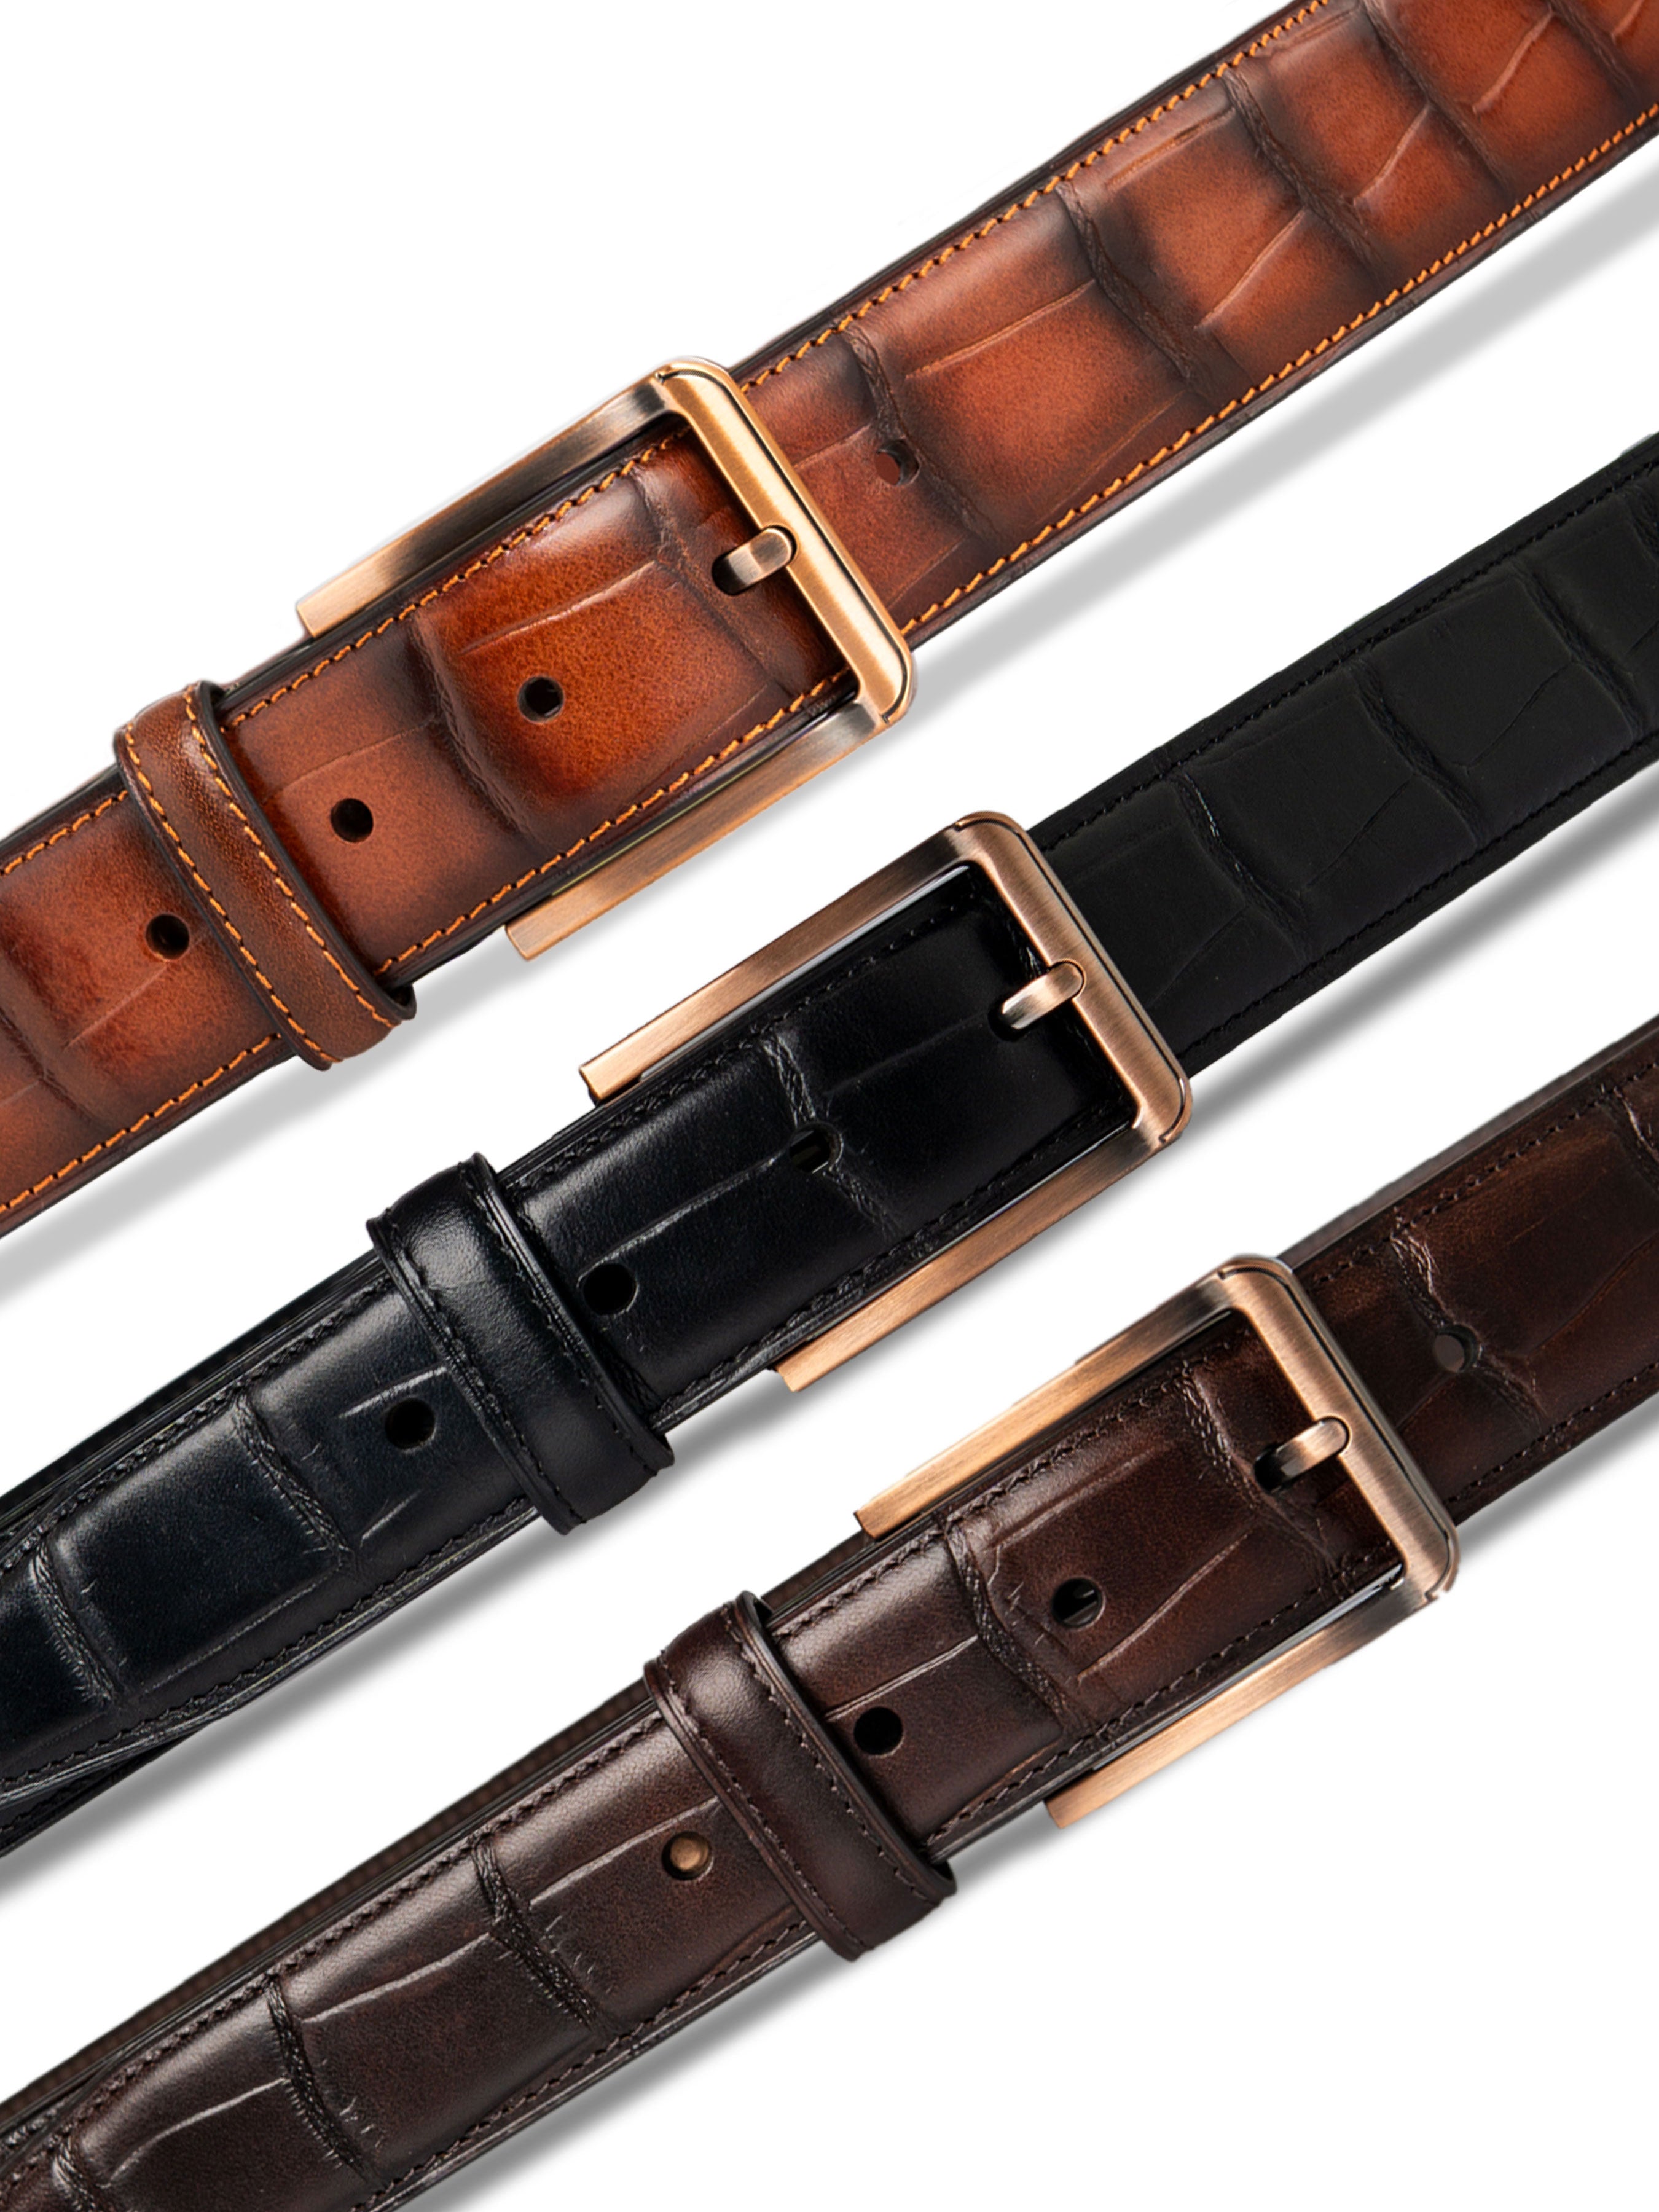 Croco Leather Belt with Copper-toned Buckle - Zeve Shoes